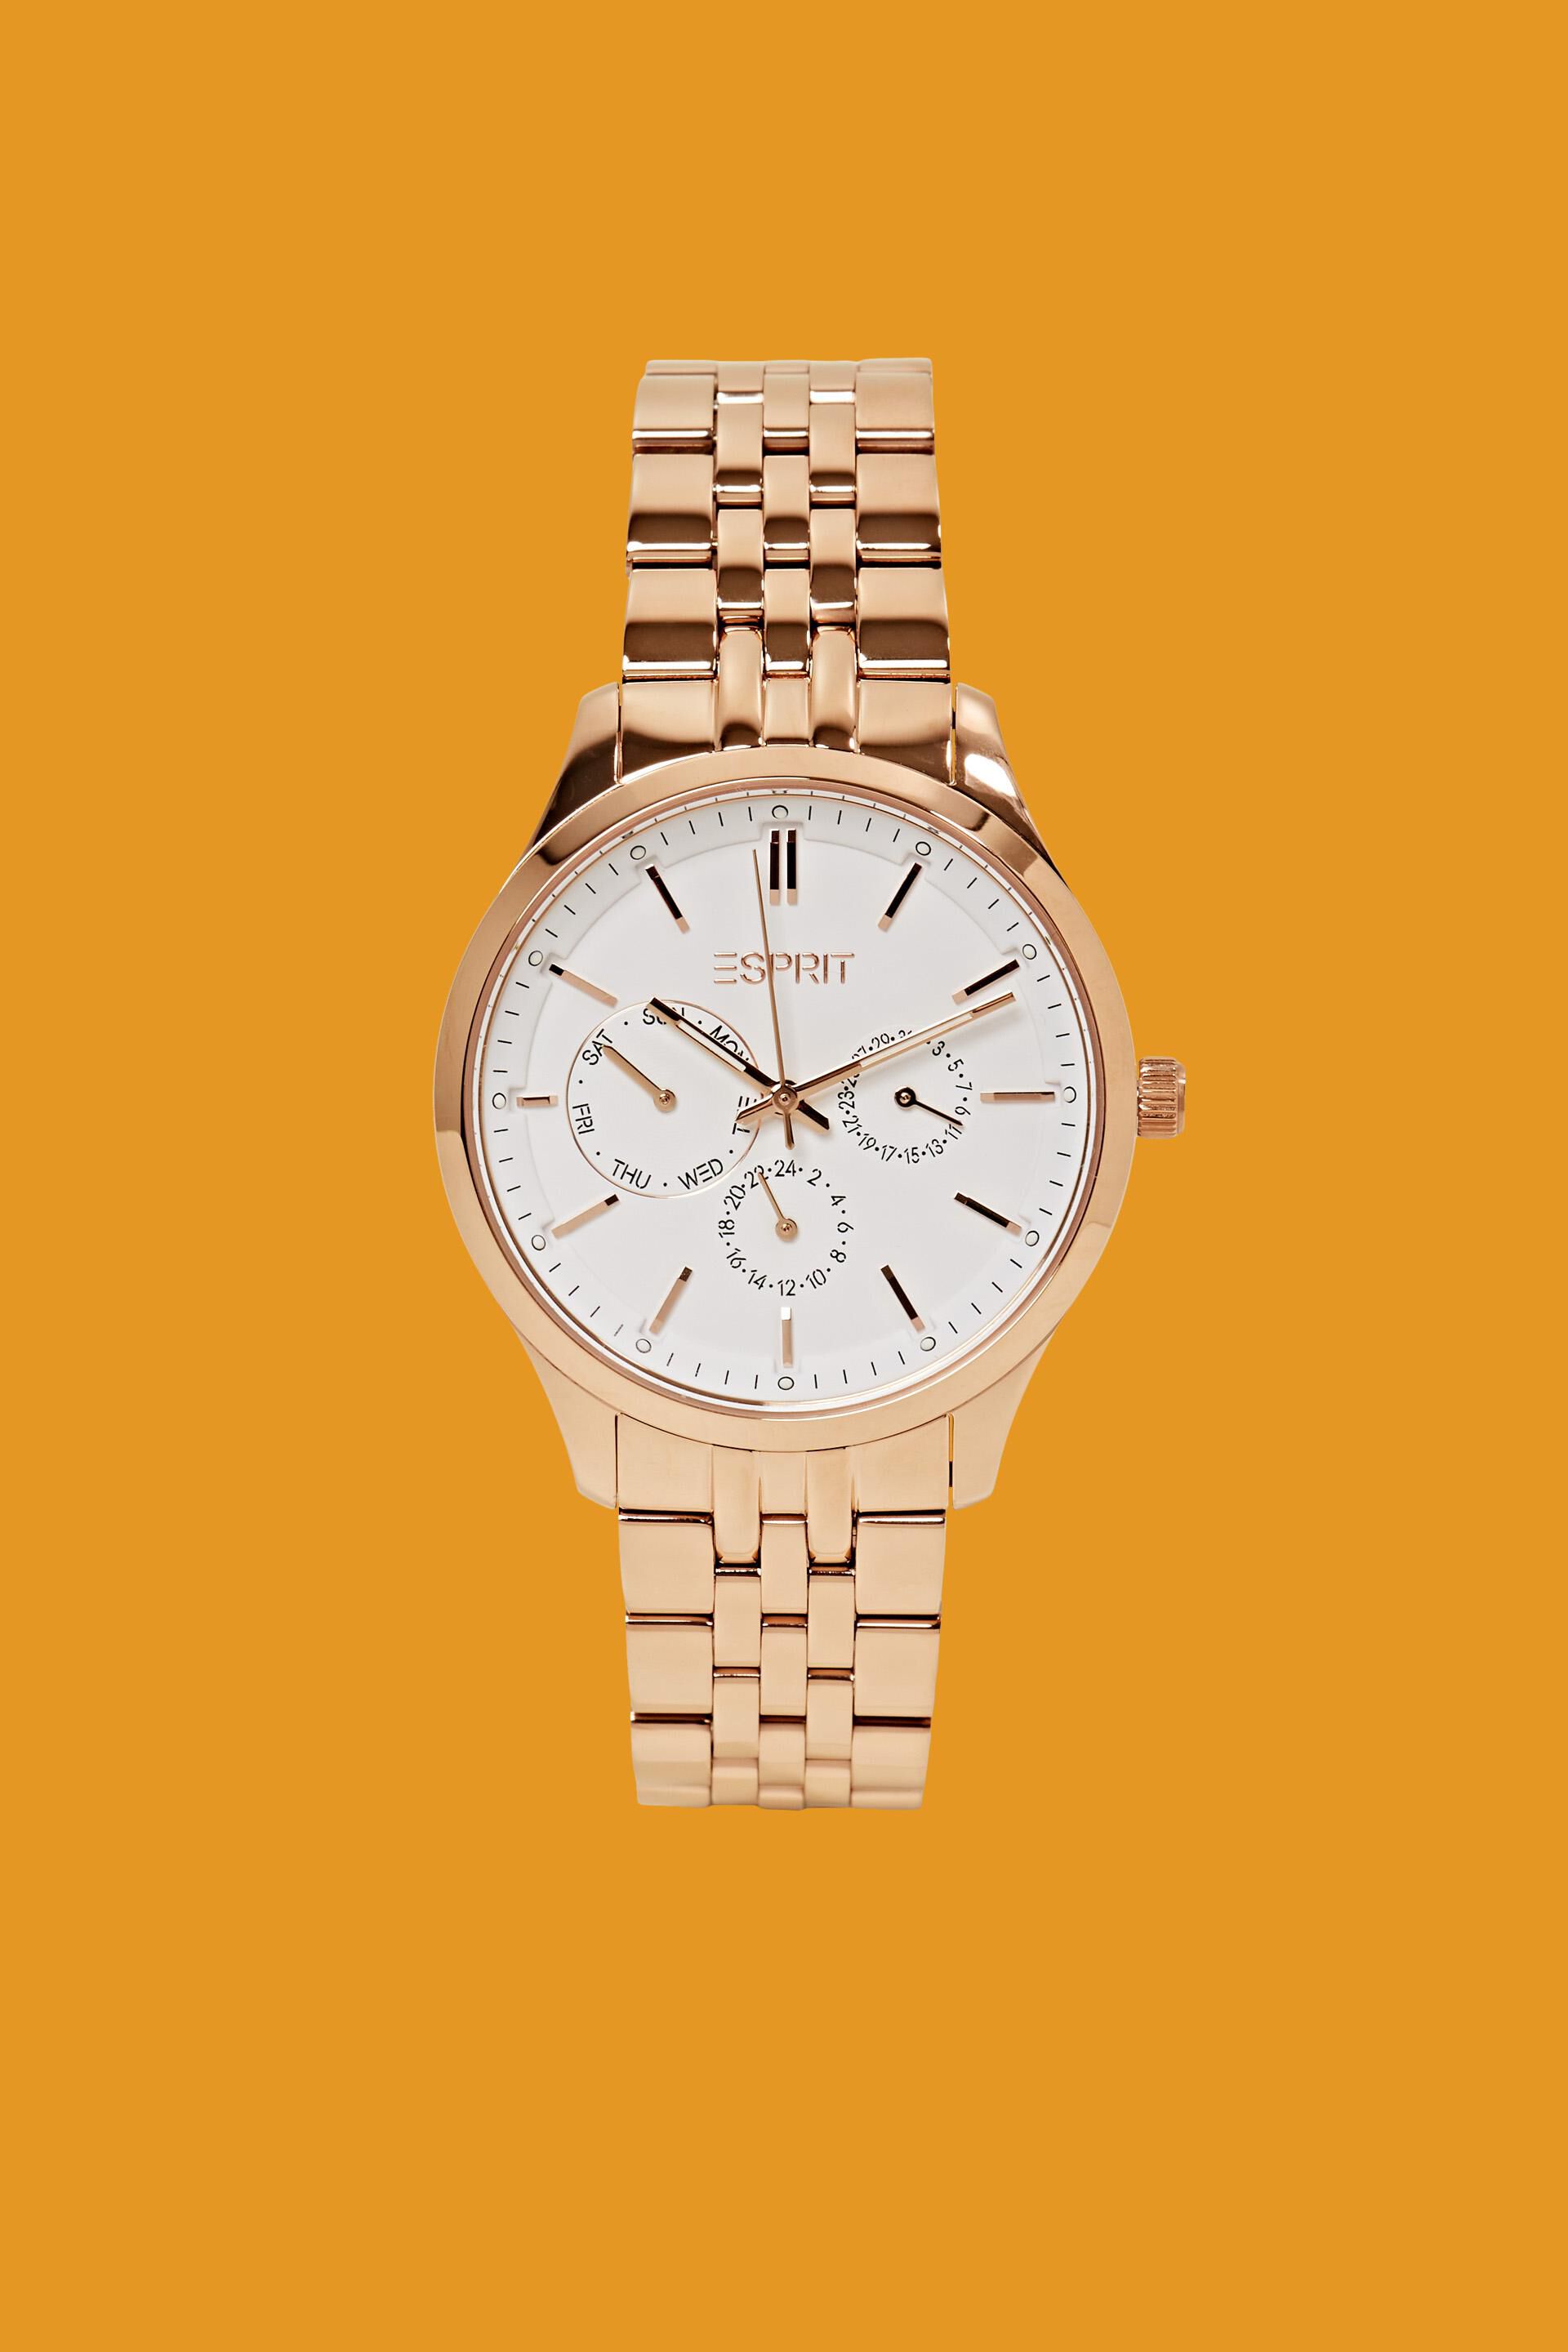 Esprit Online Store Multi-functional watch with a link bracelet